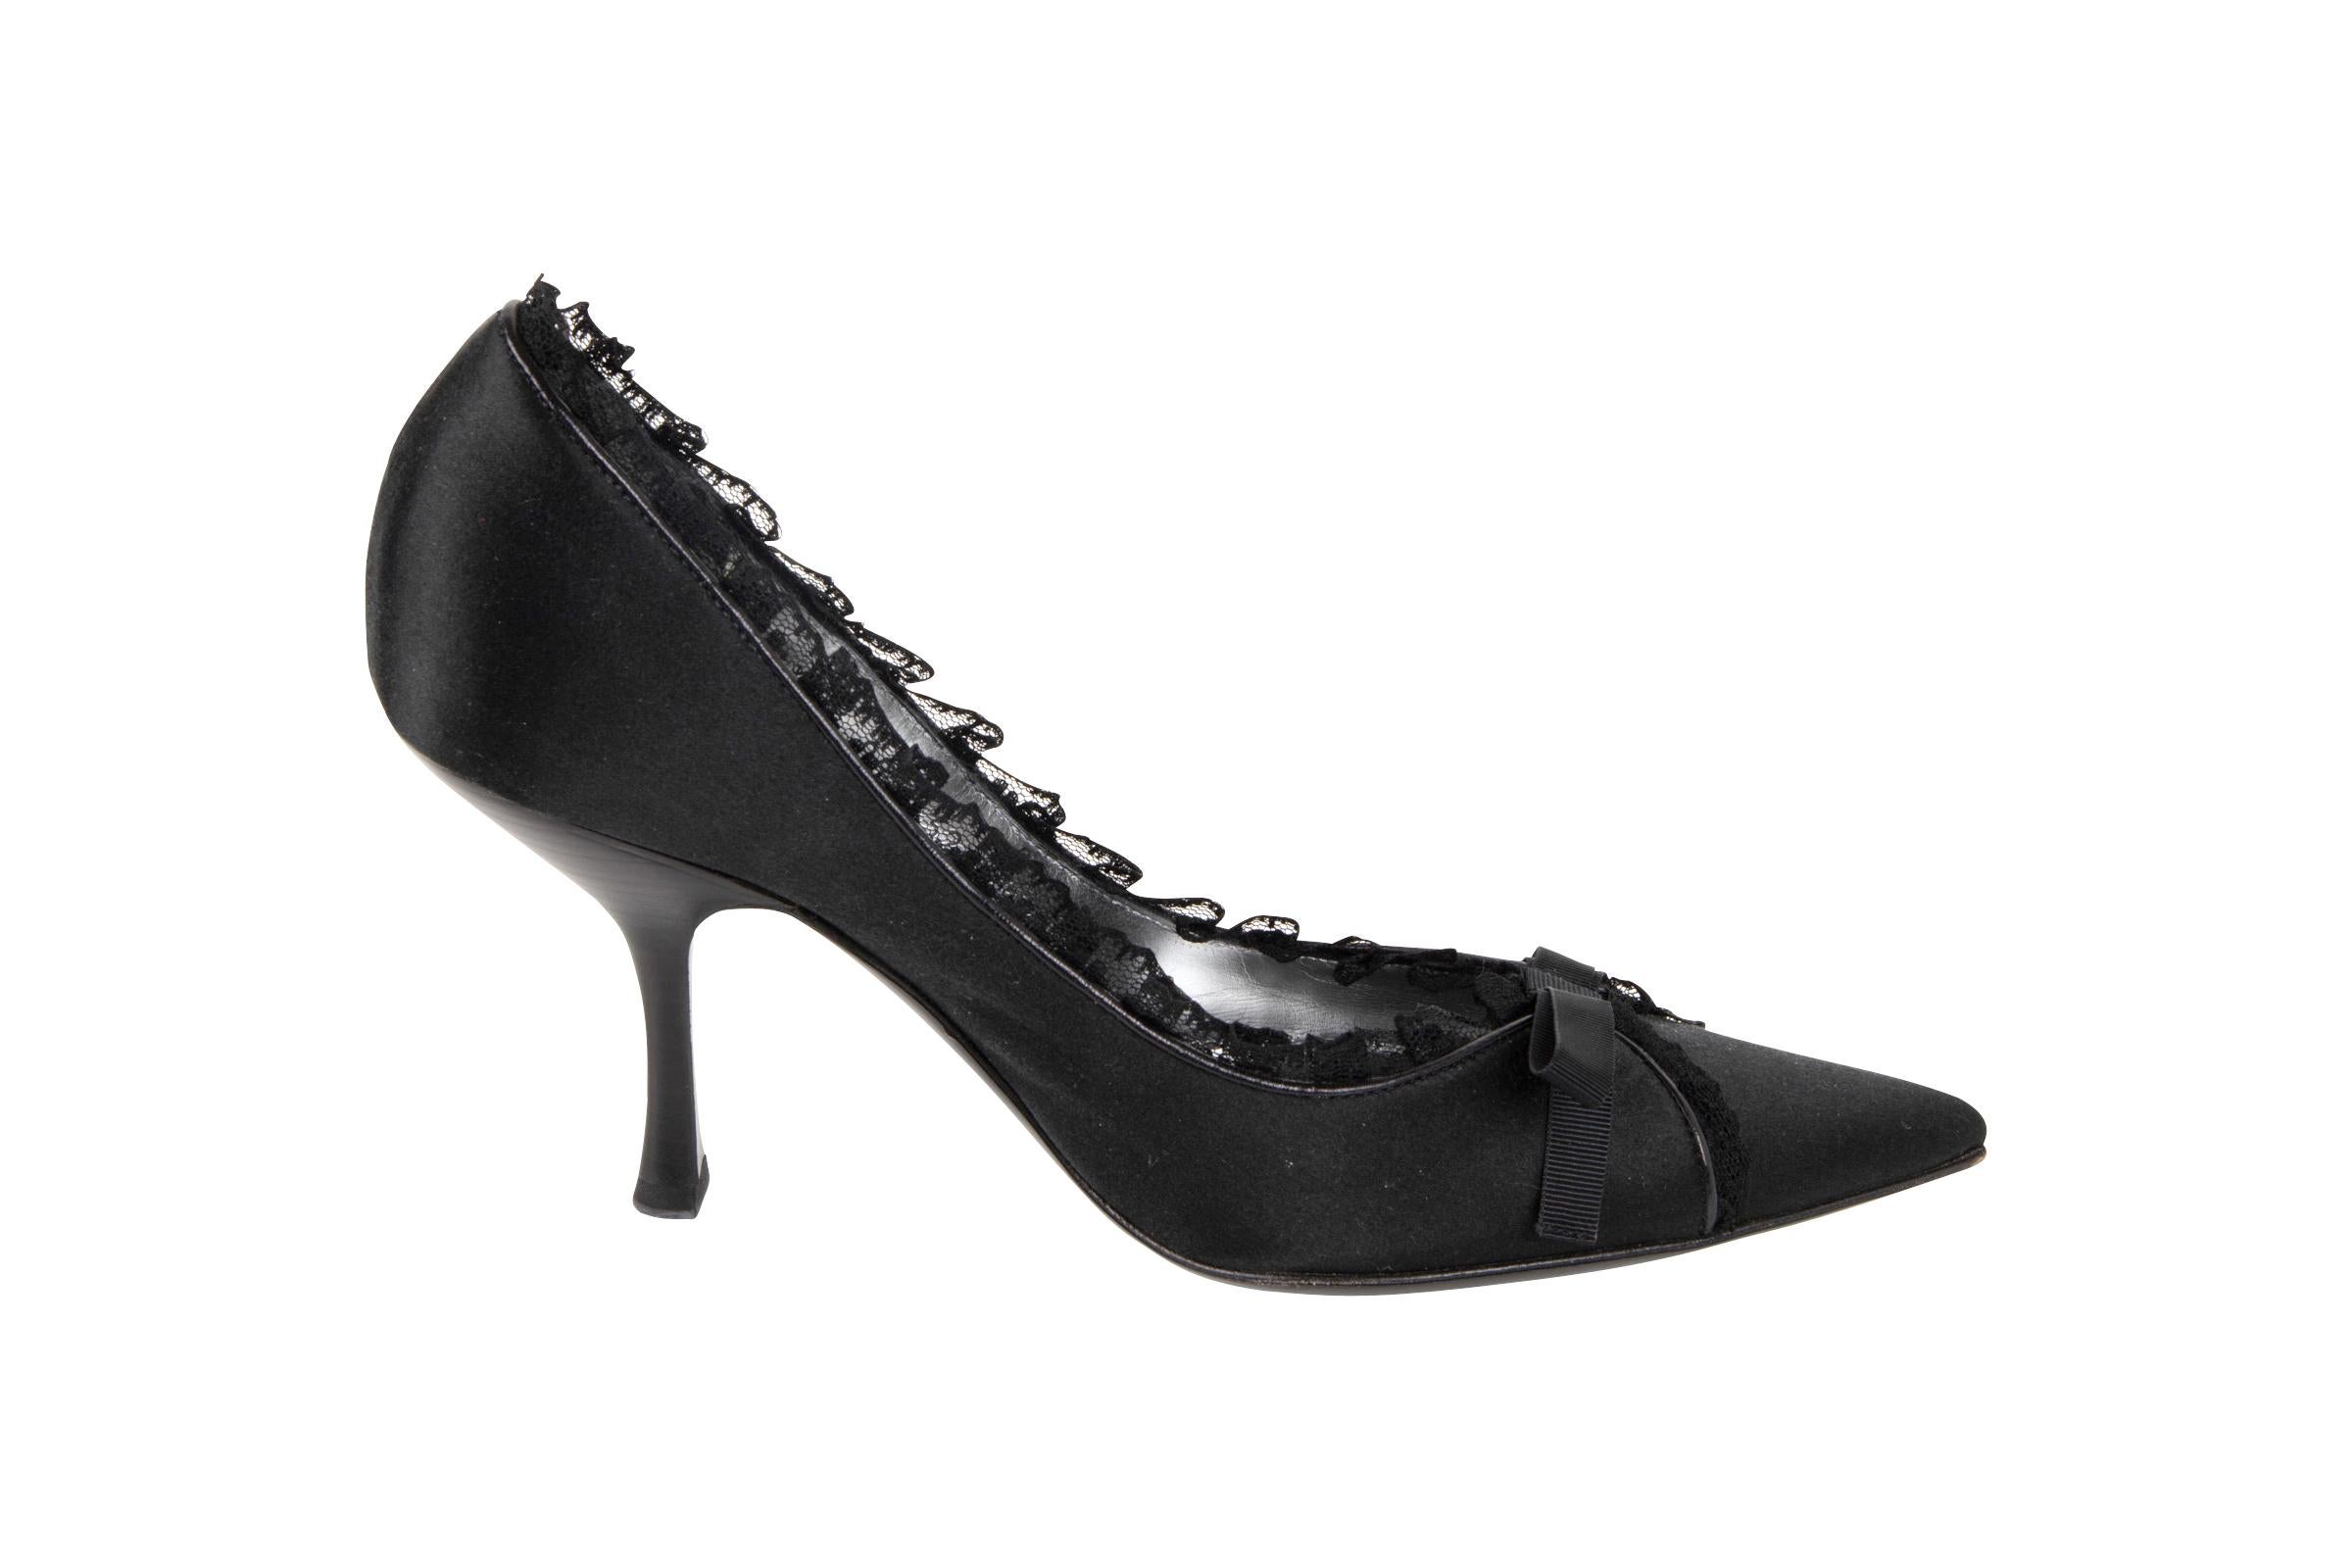 Guaranteed authentic Giorgio Armani lovely jet black satin pump.  
Edged in a small black lace 'ruffle' edged by a thin black leather that accentuates the pretty lace detail. 
Fabulous low cut in the front of the foot.
Small black peaux de soie bow.